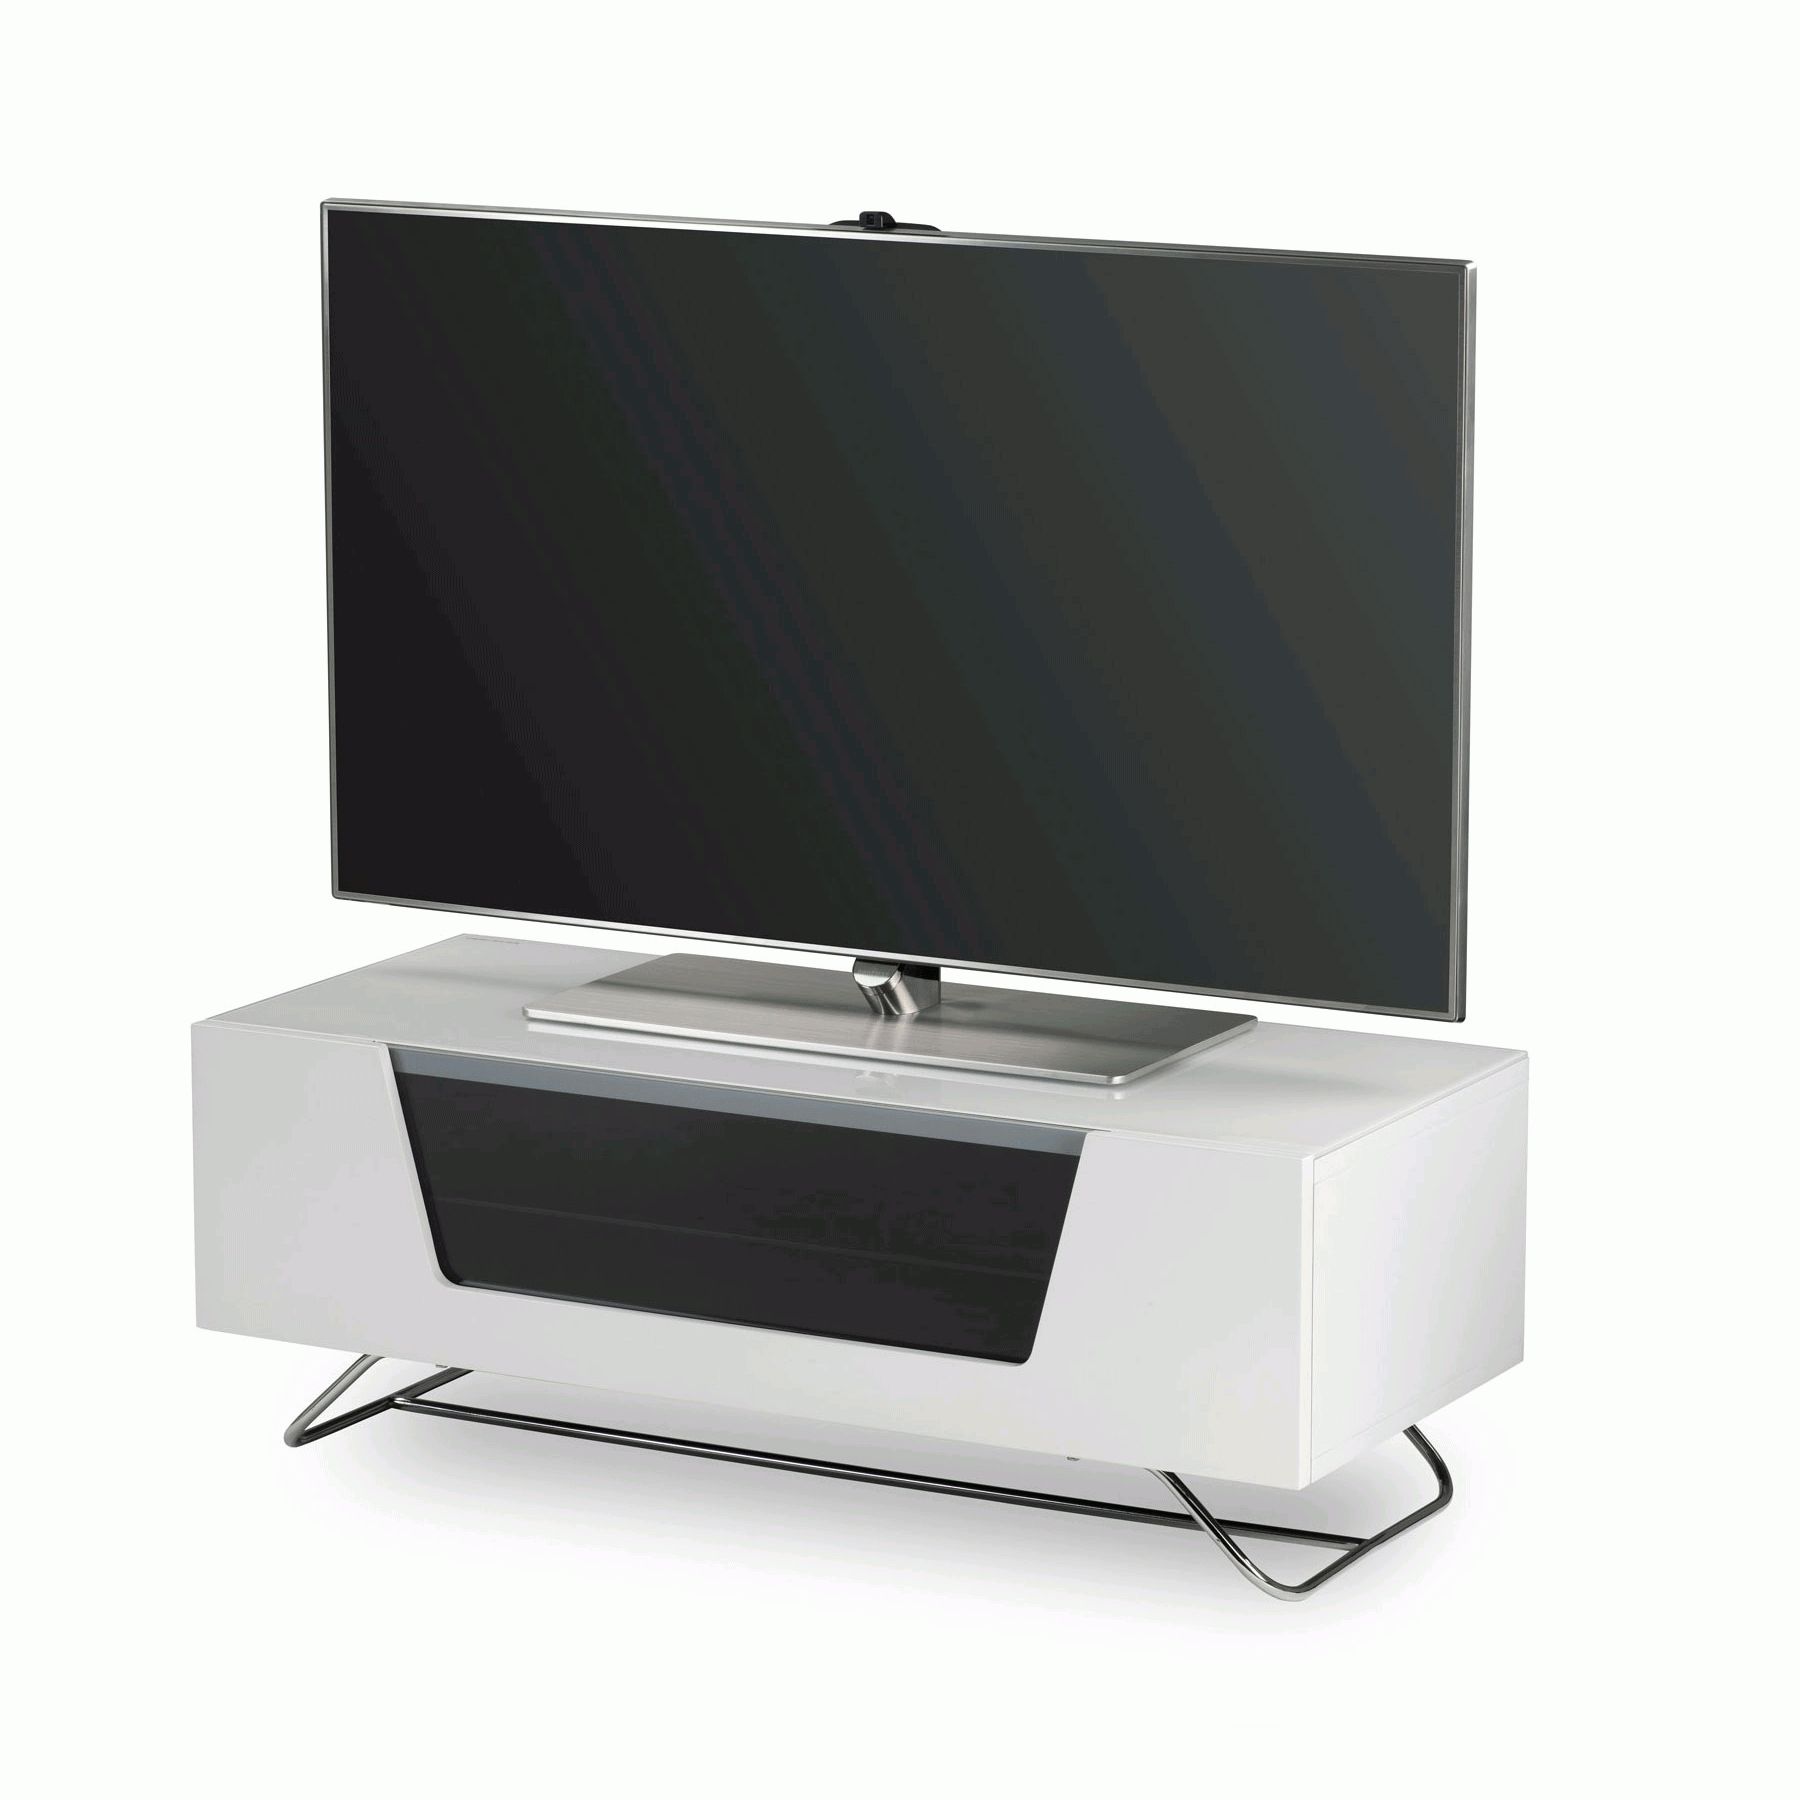 100cm Tv Stands Regarding Fashionable Alphason Chromium 2 100cm White Tv Stand For Up To 50" Tvs (View 6 of 20)